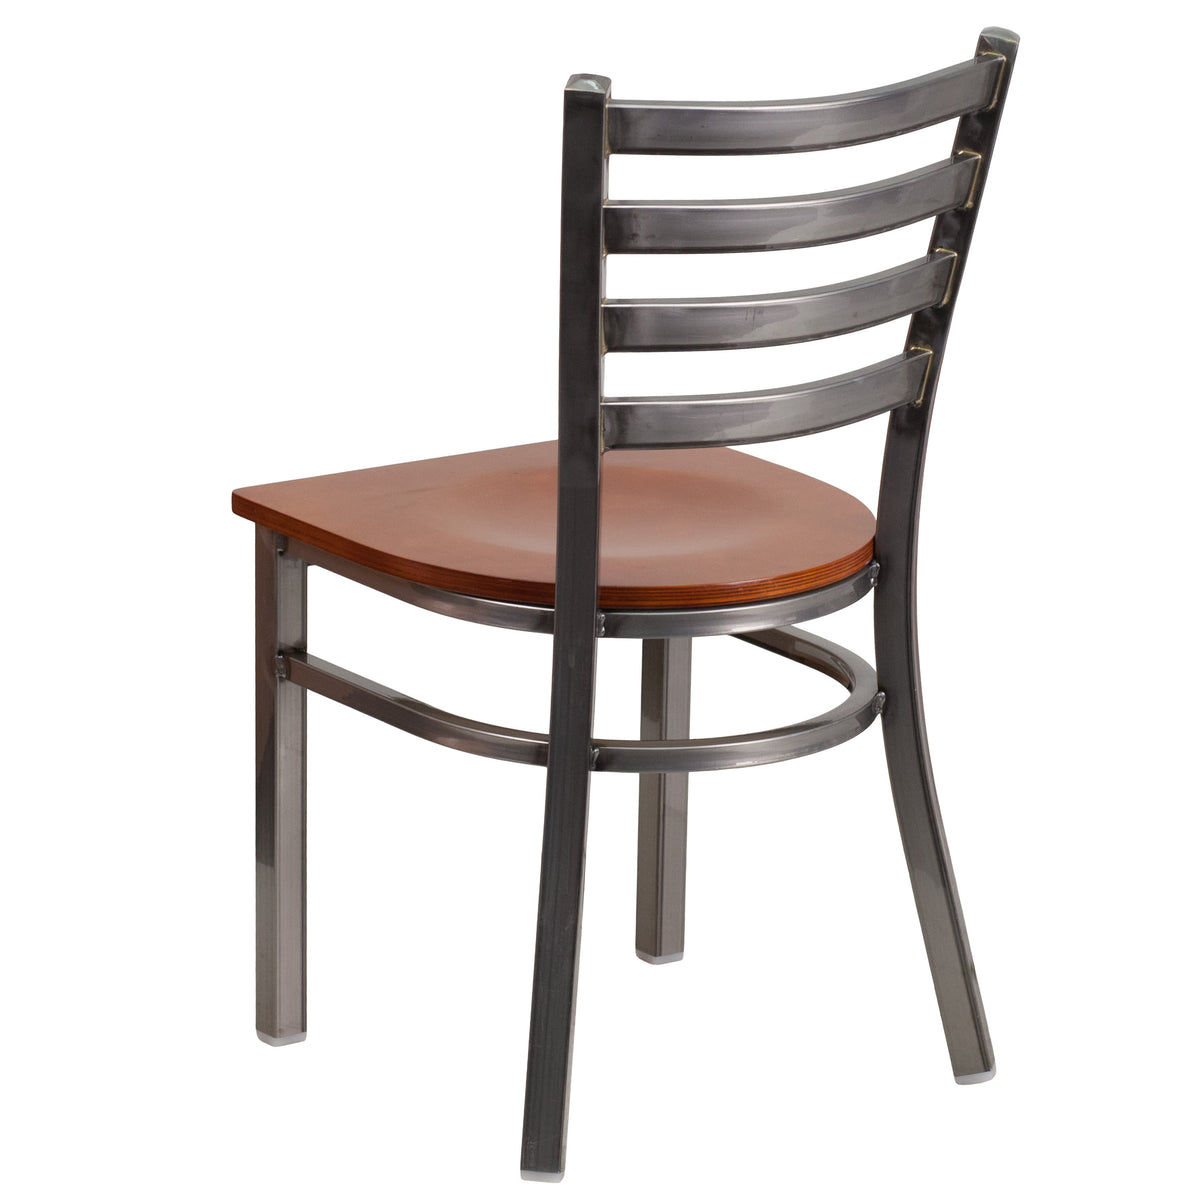 Cherry Wood Seat/Clear Coated Metal Frame |#| Clear Coated Ladder Back Metal Restaurant Chair - Cherry Wood Seat